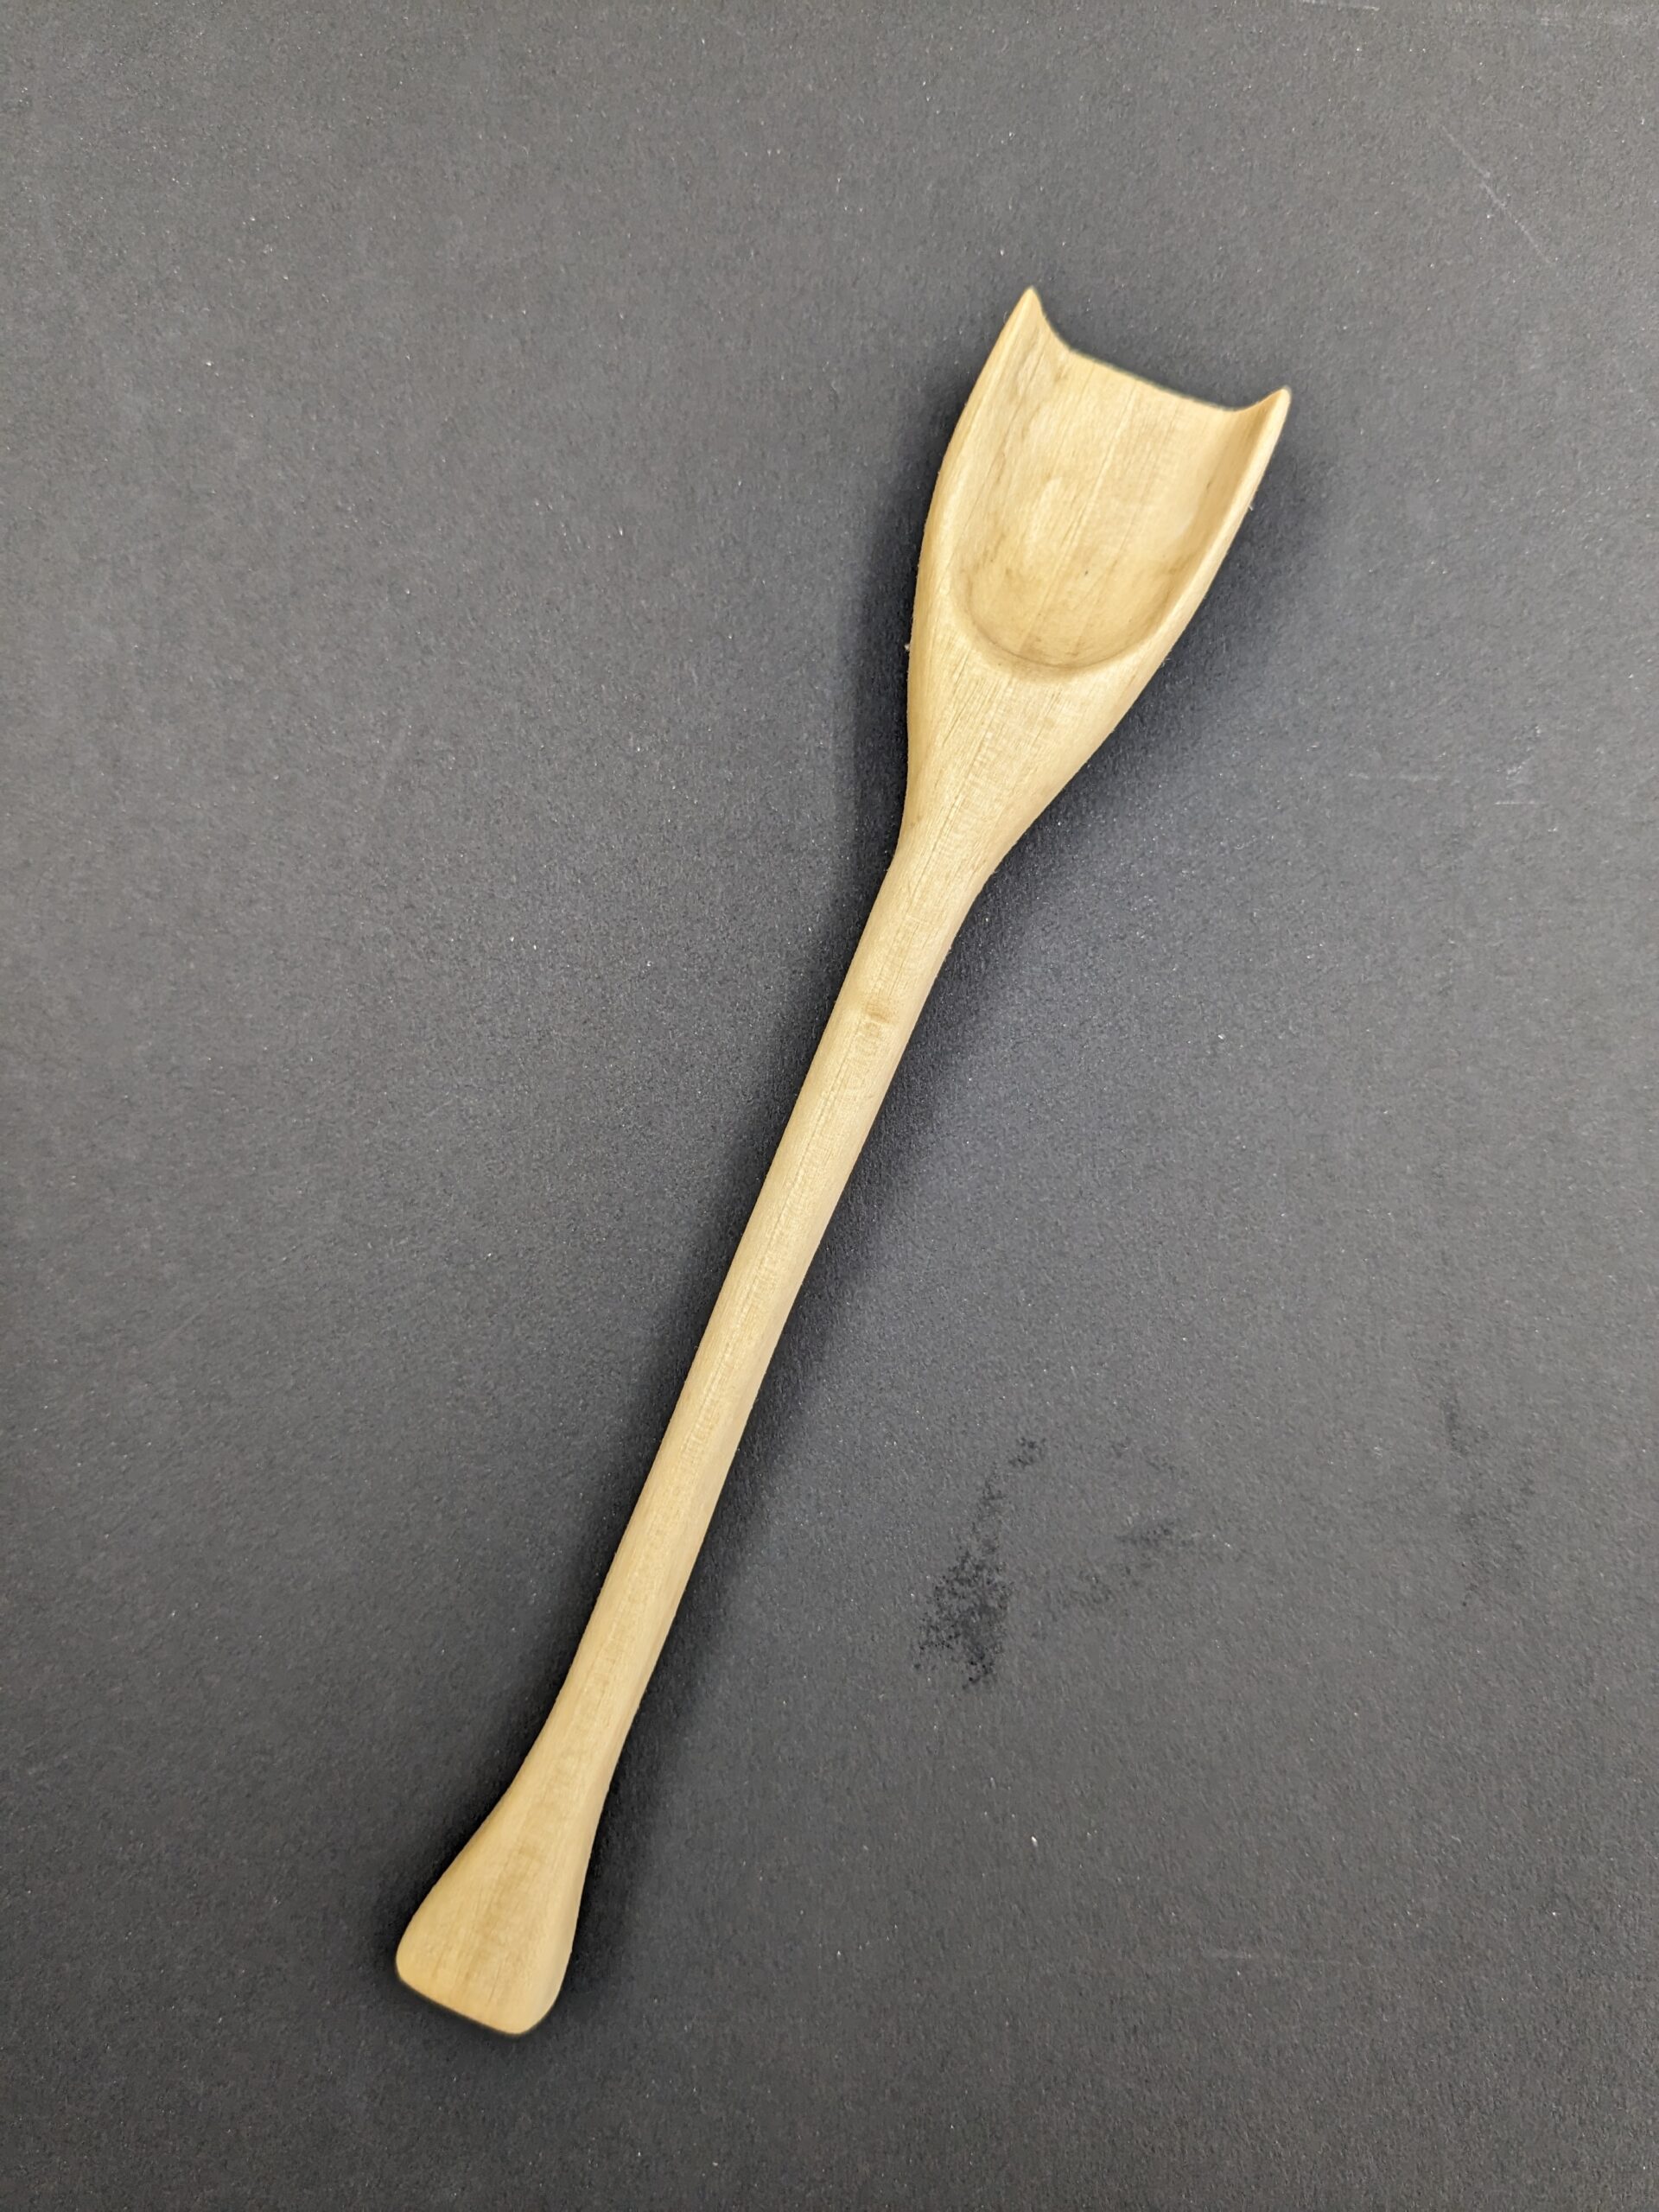 Woodcarving: Spoonmaking Operation ART Class. Example of 1 wood carved spoon.